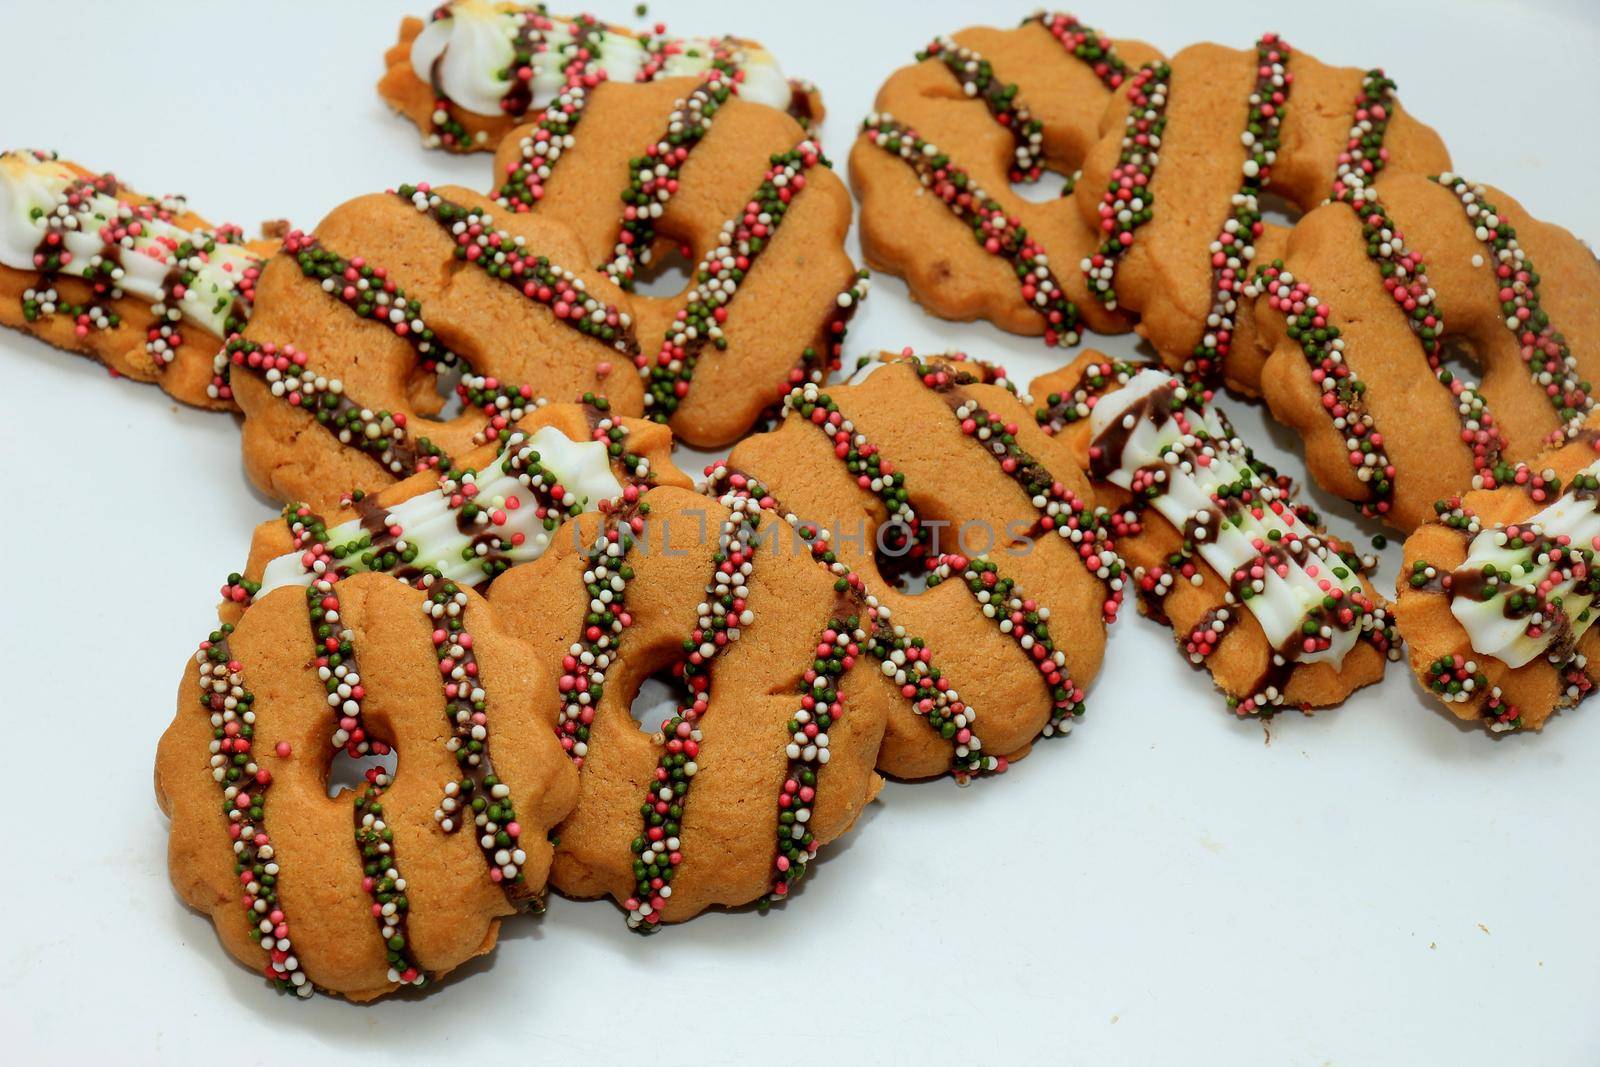 Crispy Christmas Cookies decorated with chocolate and sprinkles by studioportosabbia